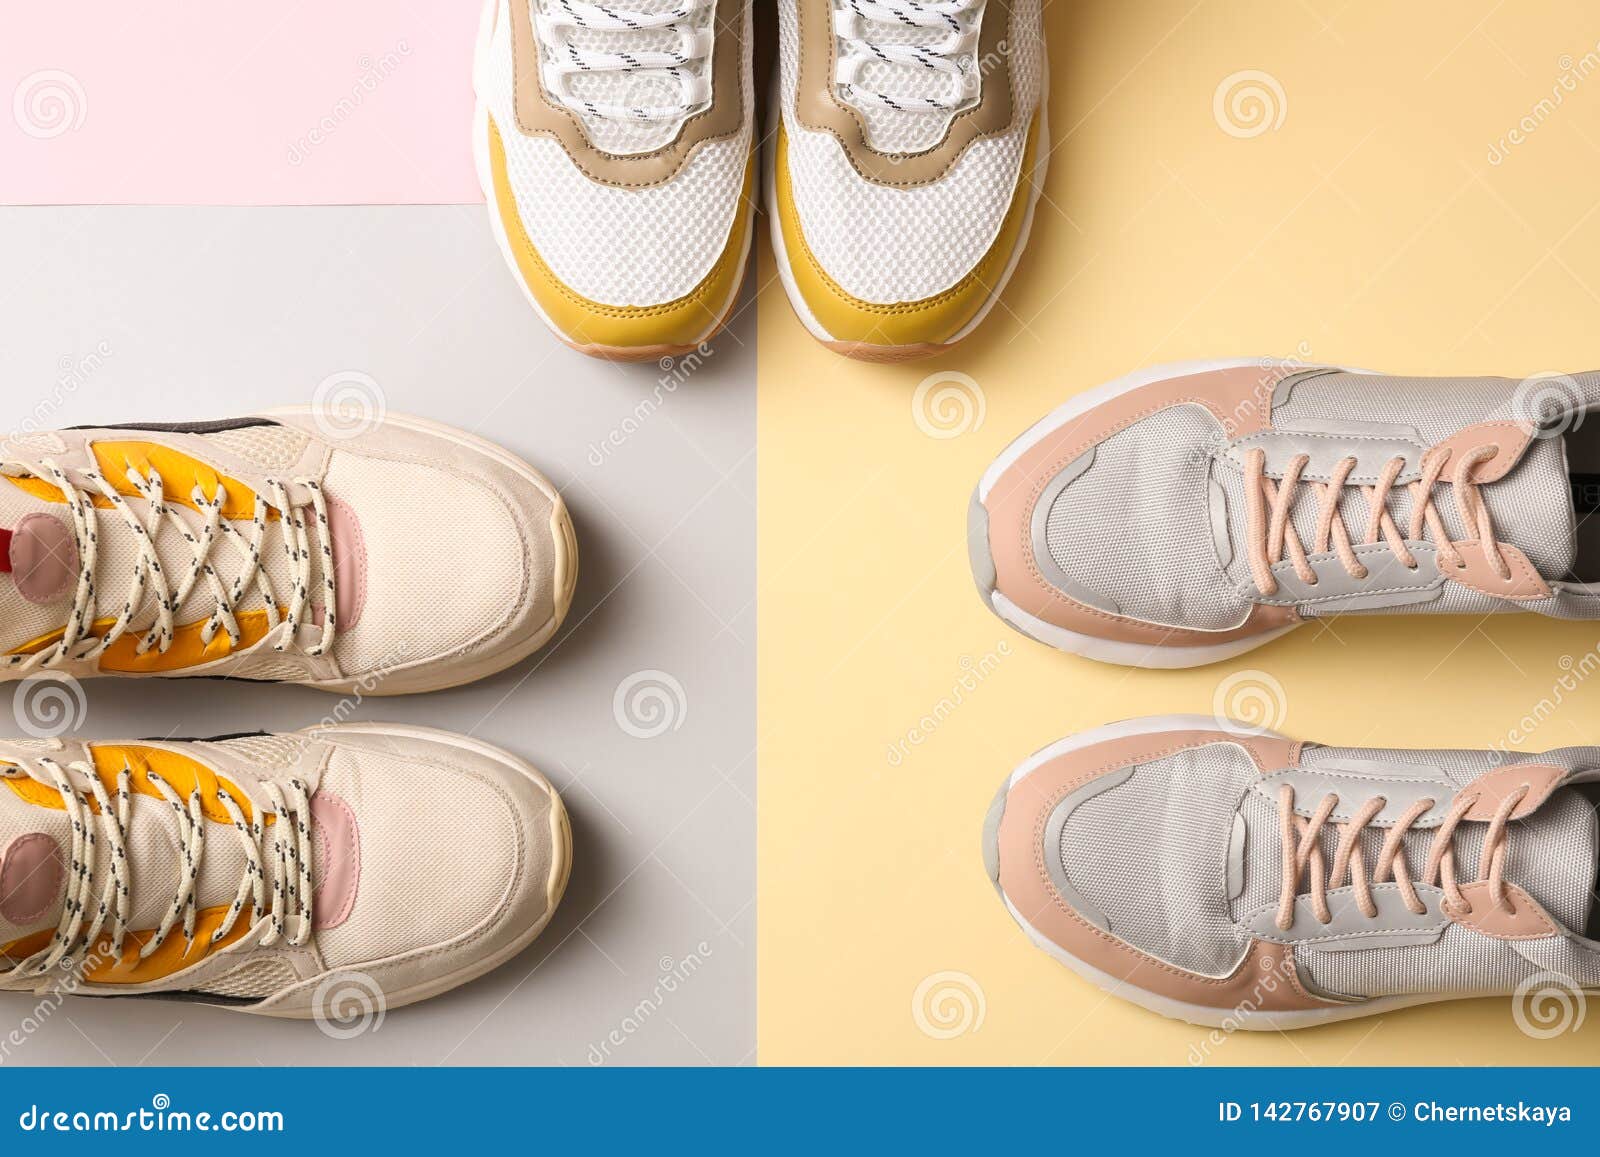 Different Sports Shoes on Color Background Stock Image - Image of shoe ...